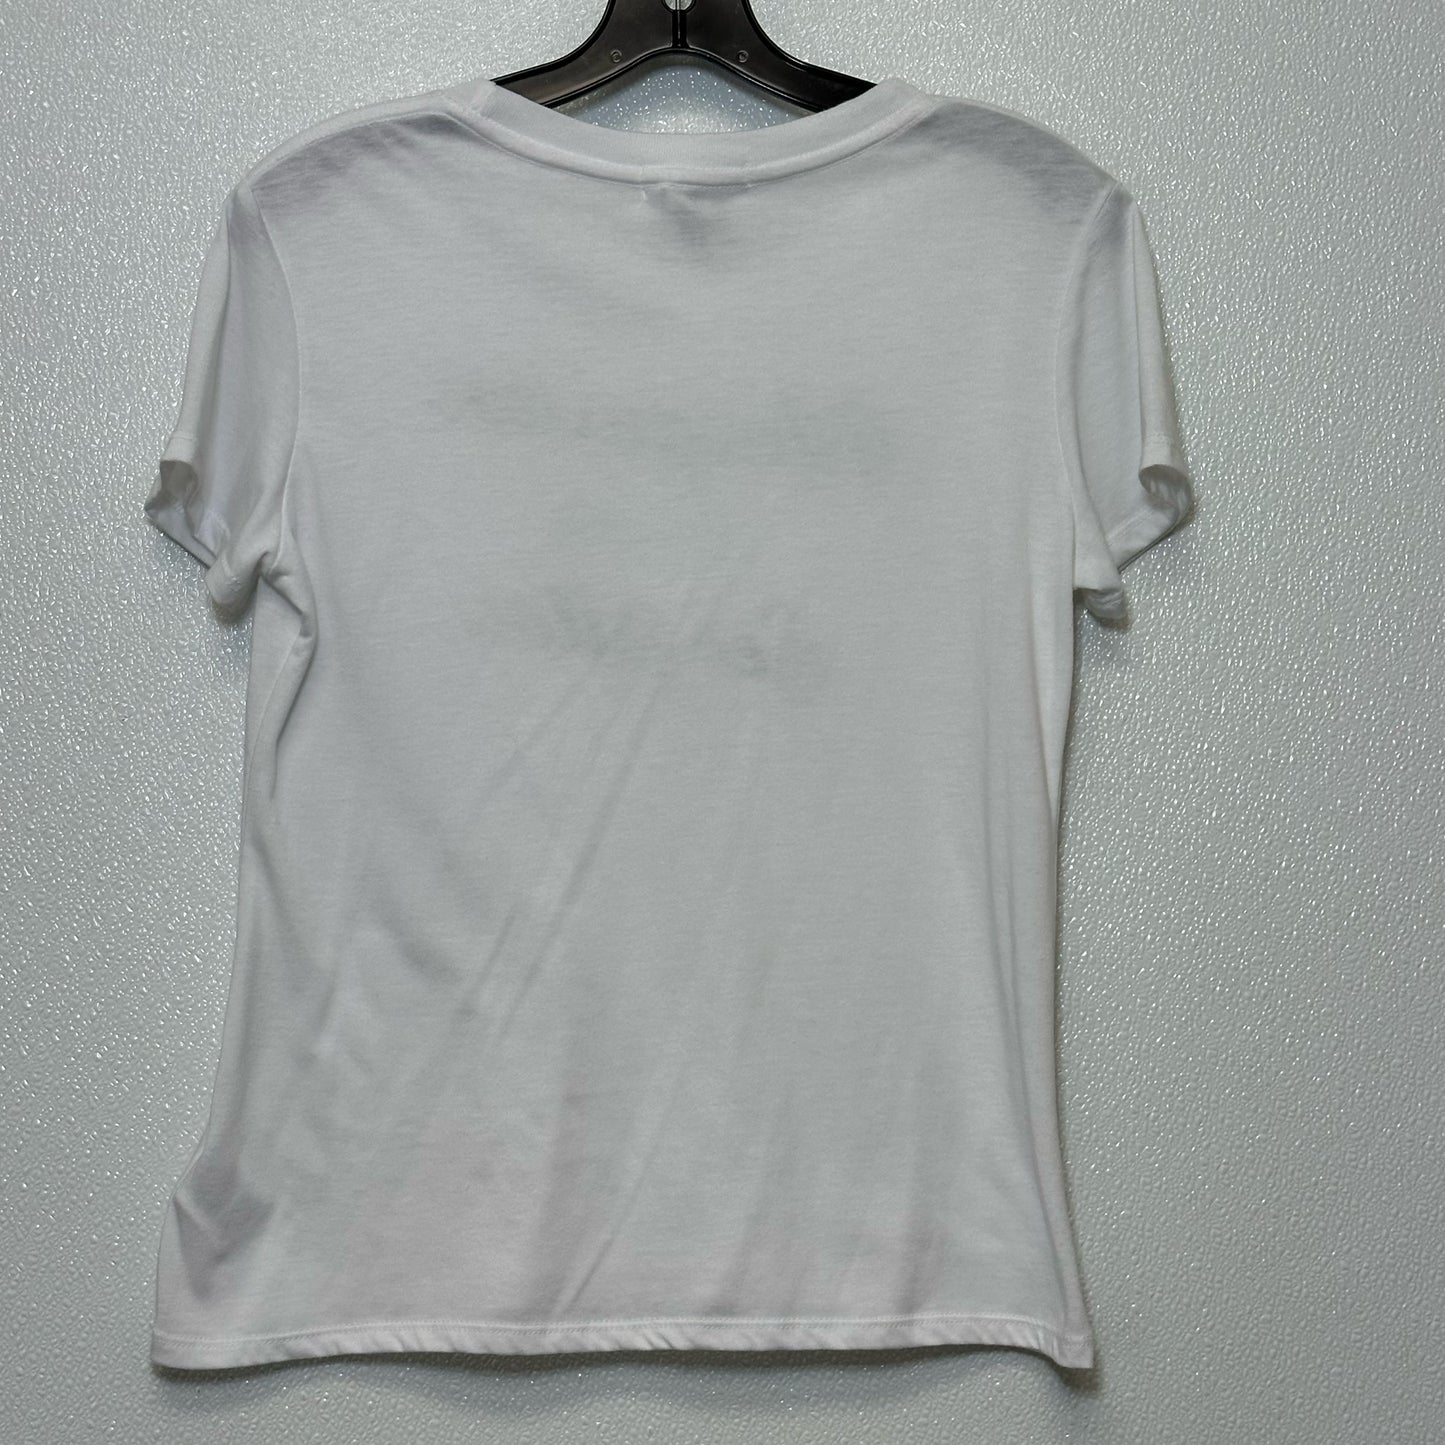 Top Short Sleeve By Clothes Mentor  Size: Xs